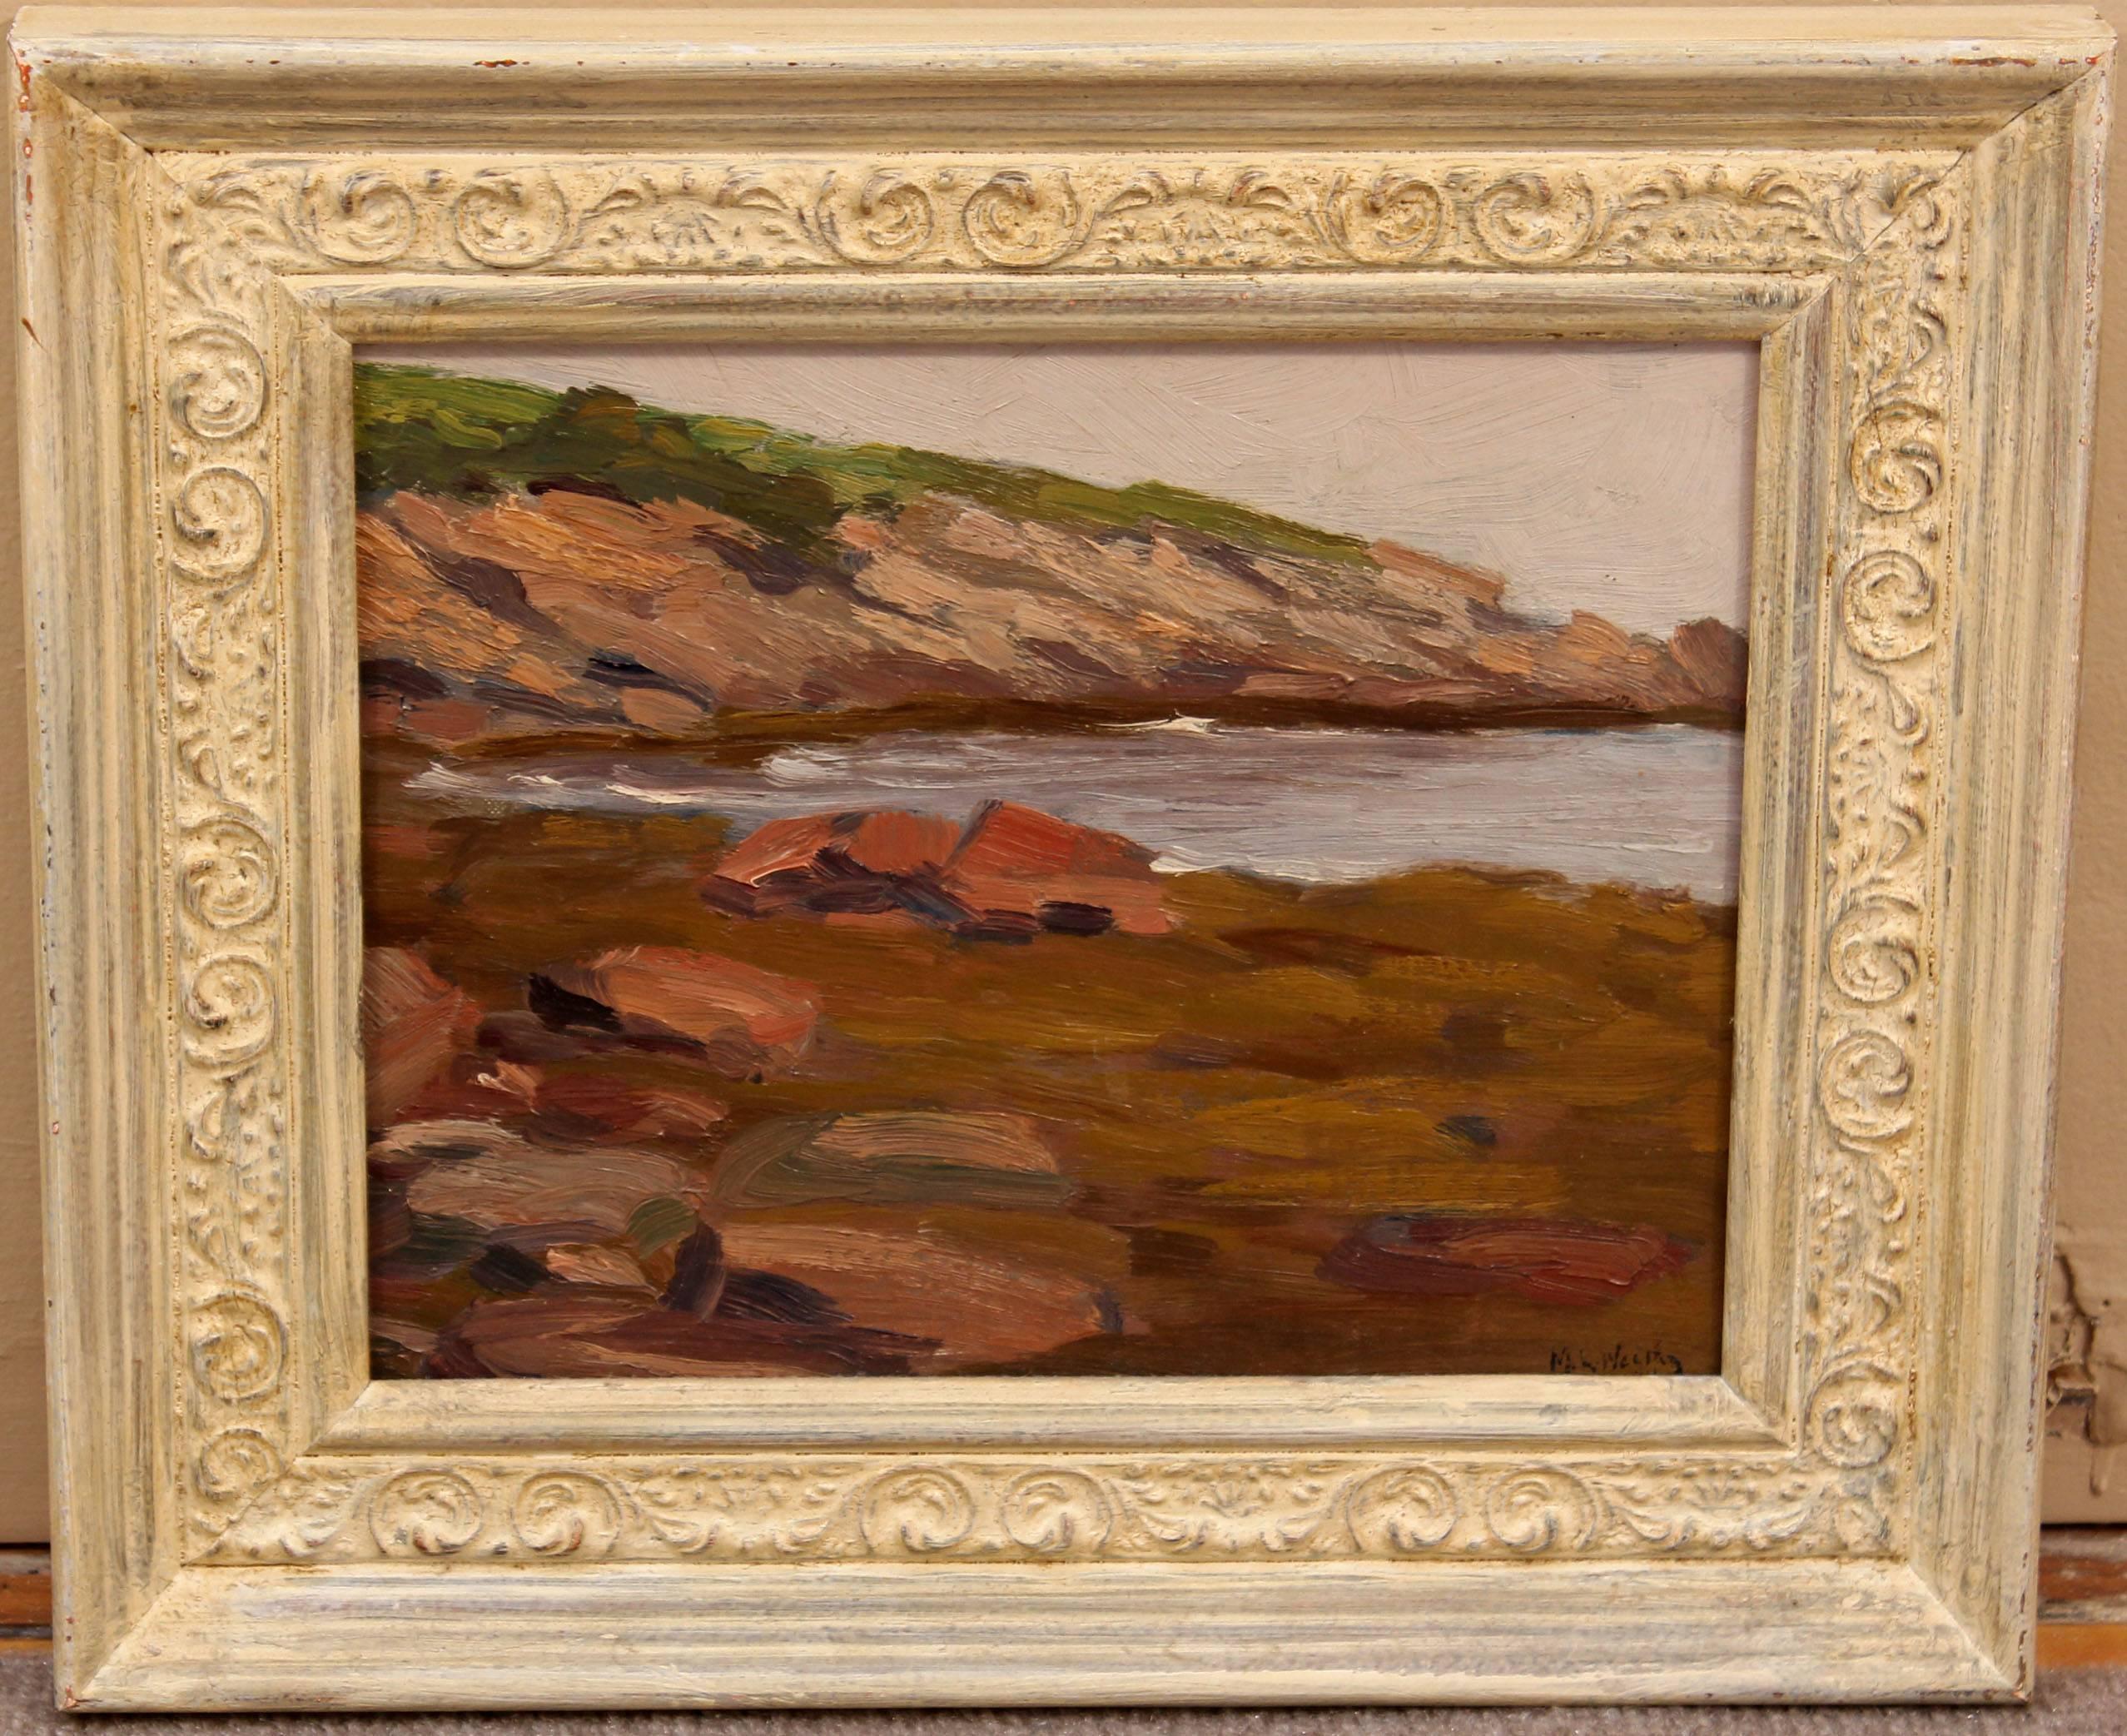 Impressionist seascape oil painting. Oil on board. Matilda Leipold Weston was born in Germany on April 21, 1870. Weston moved to southern California in the 1930s. She lived in Carlsbad and San Diego before settling in Pasadena. She died there on